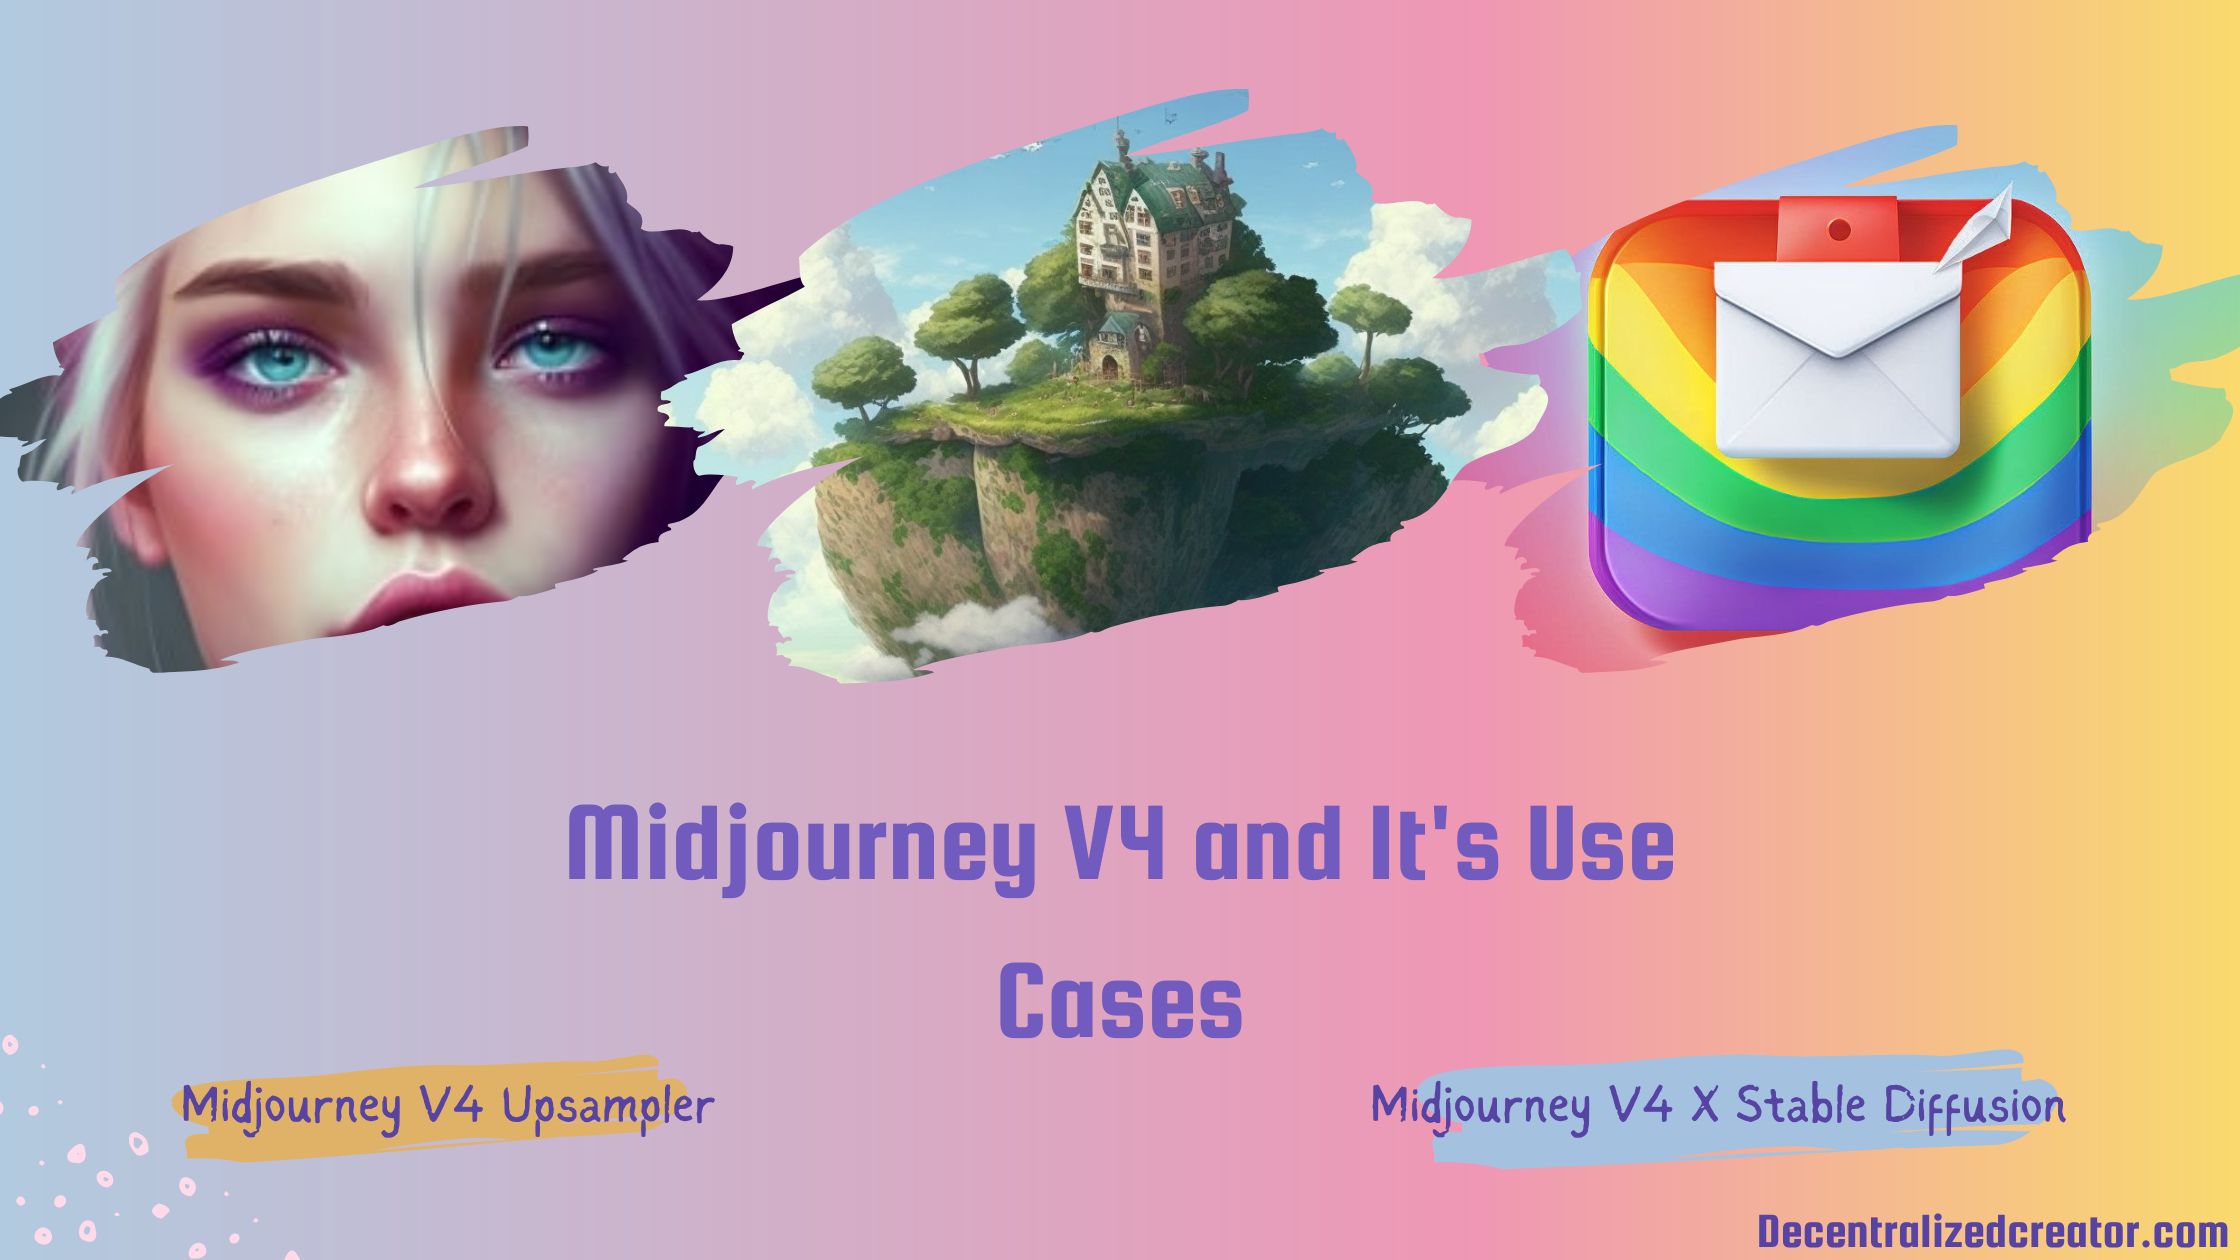 All You Need to Know About Midjourney V4 and It's Use Cases